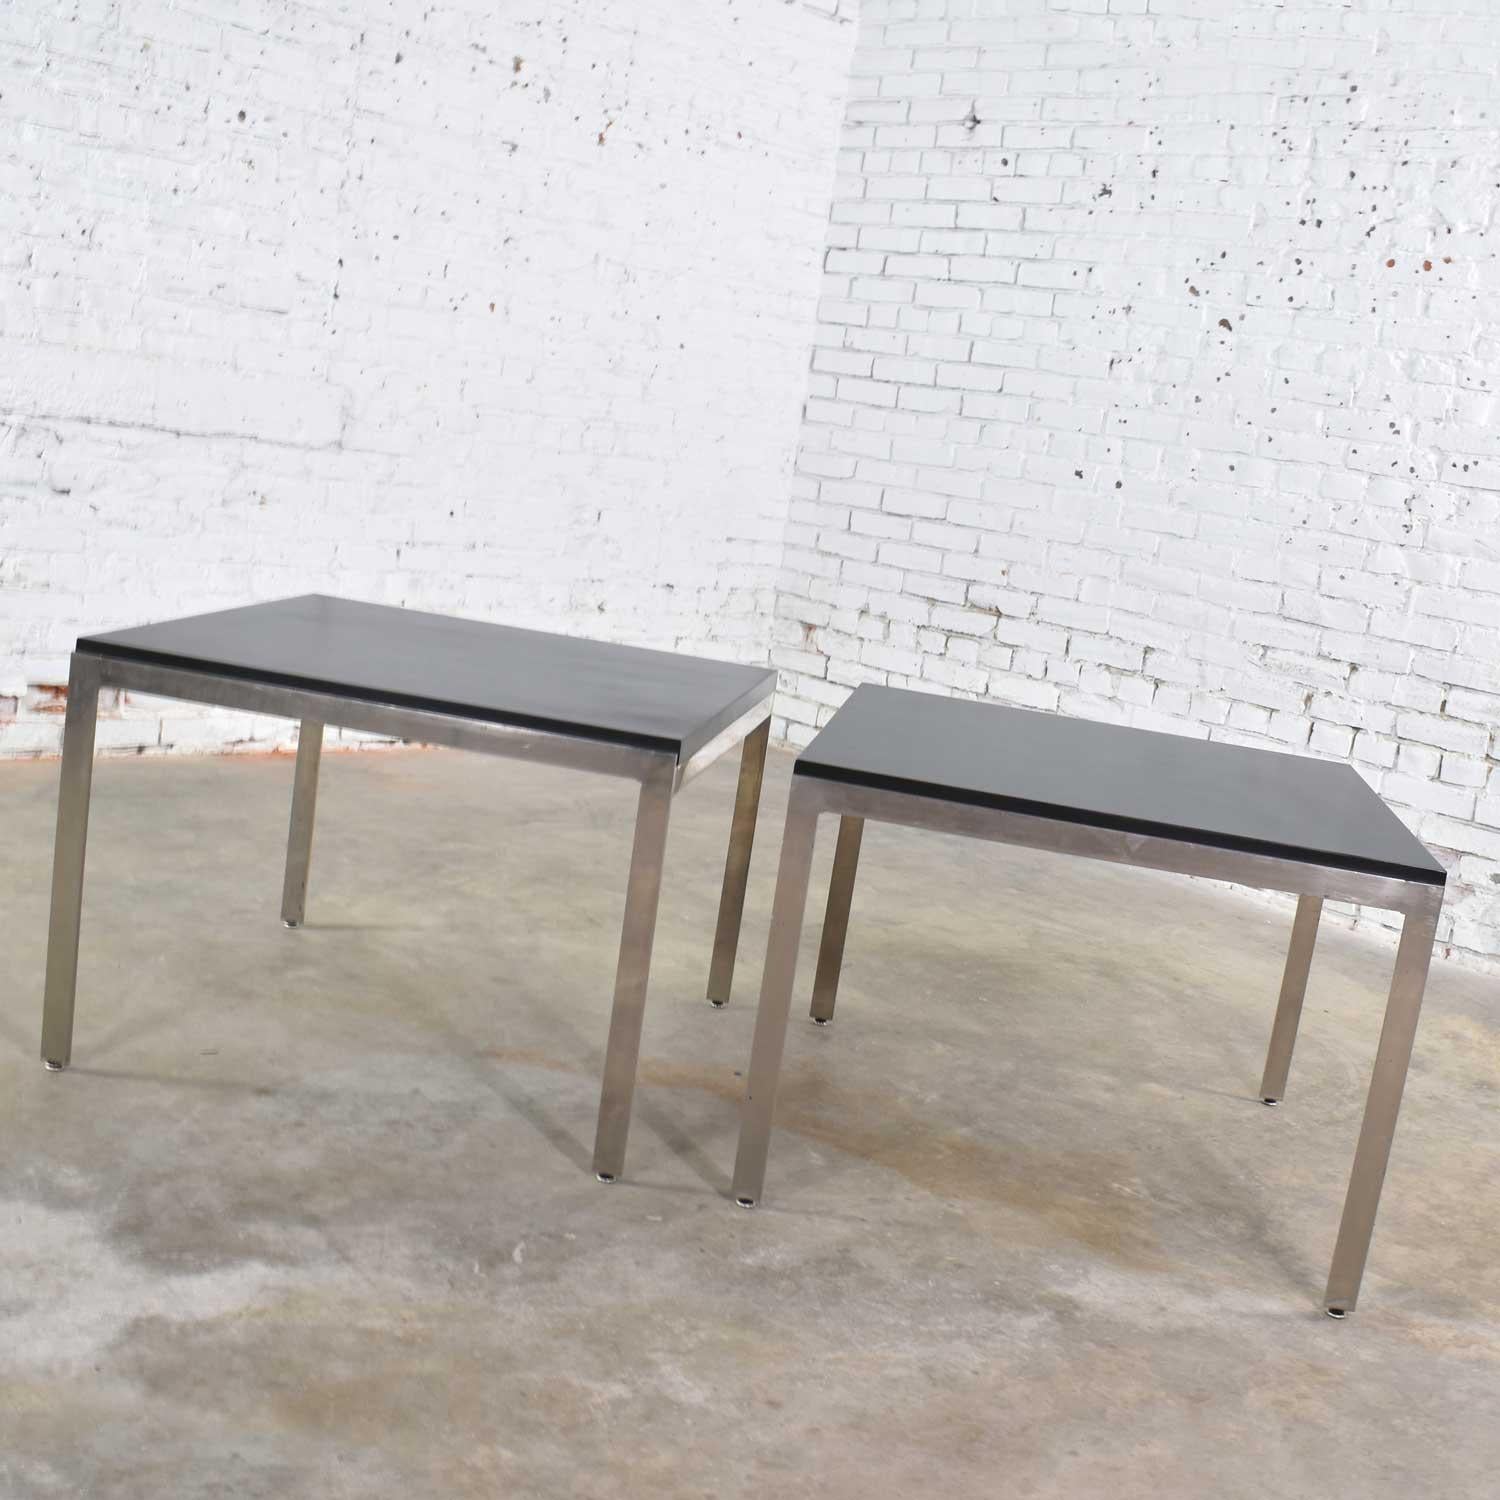 Very handsome pair of stainless steel based large square end tables with black laminate tops. They are in wonderful vintage condition. The stainless may have some small signs of age and use but nothing major. The laminate tops have received a fresh